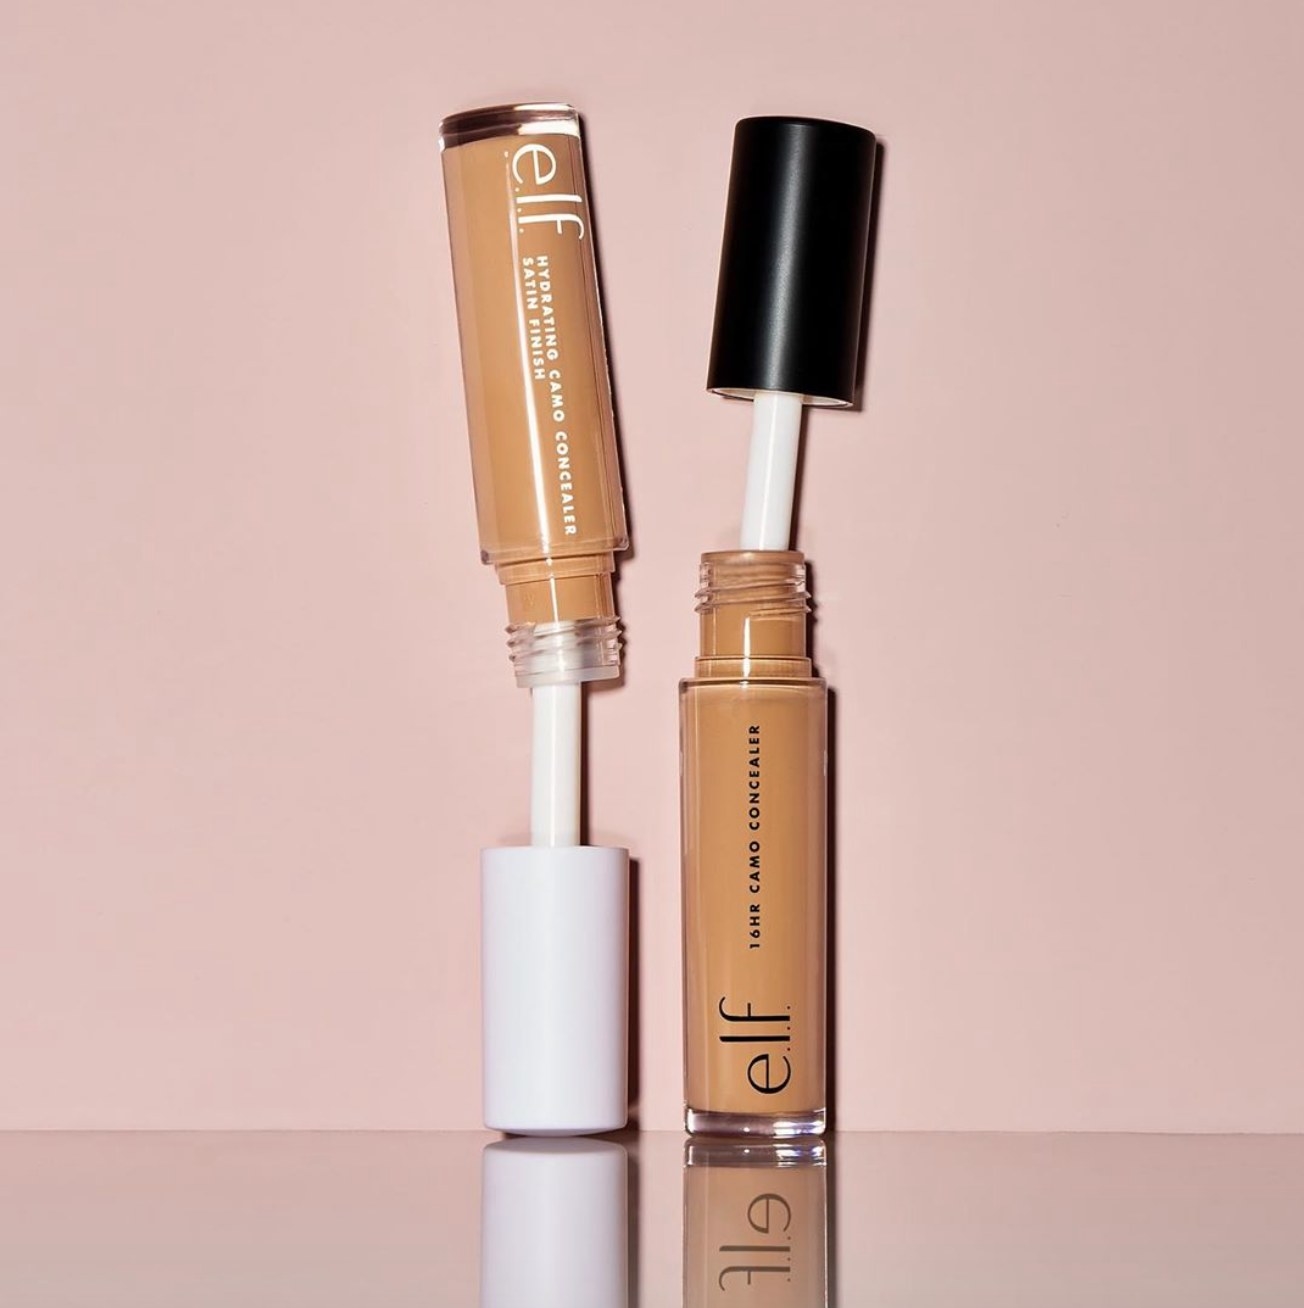 The small bottle of concealer